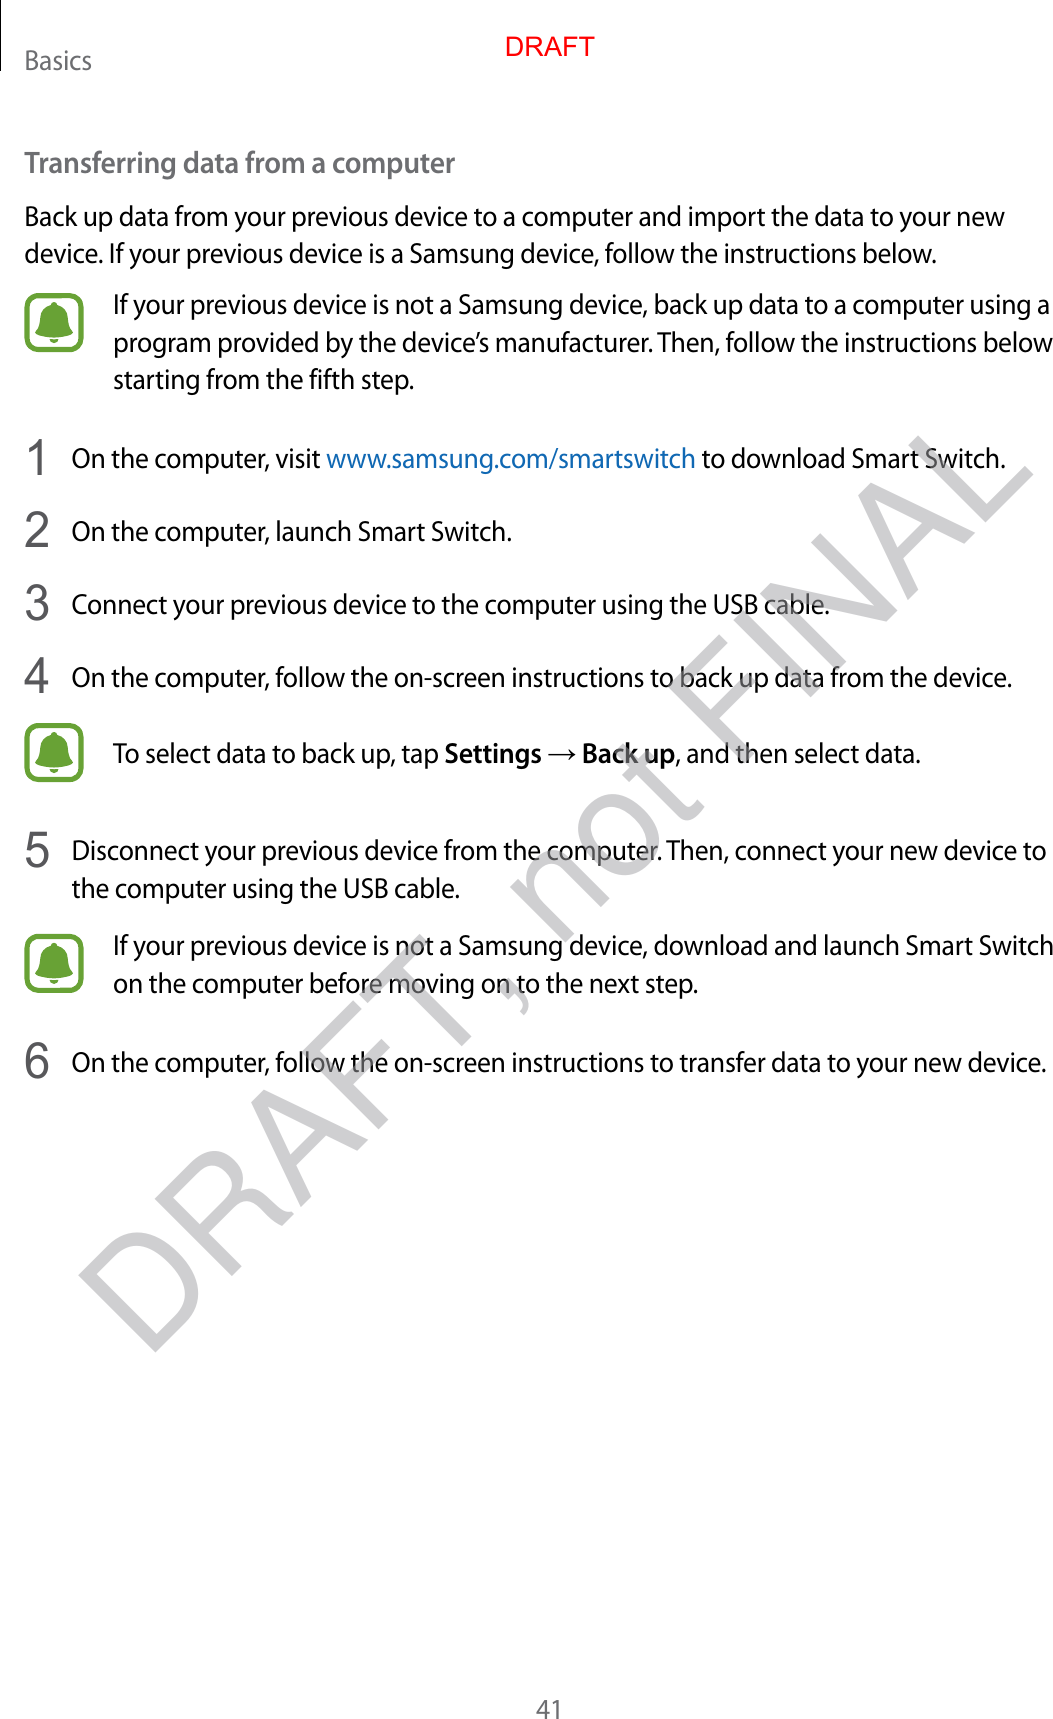 Basics41Transferring data from a computerBack up data from your previous device to a computer and import the data to your new device. If your previous device is a Samsung device, follow the instructions below.If your previous device is not a Samsung device, back up data to a computer using a program provided by the device’s manufacturer. Then, follow the instructions below starting from the fifth step.1  On the computer, visit www.samsung.com/smartswitch to download Smart Switch.2  On the computer, launch Smart Switch.3  Connect your previous device to the computer using the USB cable.4  On the computer, follow the on-screen instructions to back up data from the device.To select data to back up, tap Settings → Back up, and then select data.5  Disconnect your previous device from the computer. Then, connect your new device to the computer using the USB cable.If your previous device is not a Samsung device, download and launch Smart Switch on the computer before moving on to the next step.6  On the computer, follow the on-screen instructions to transfer data to your new device.DRAFTDRAFT, not FINAL